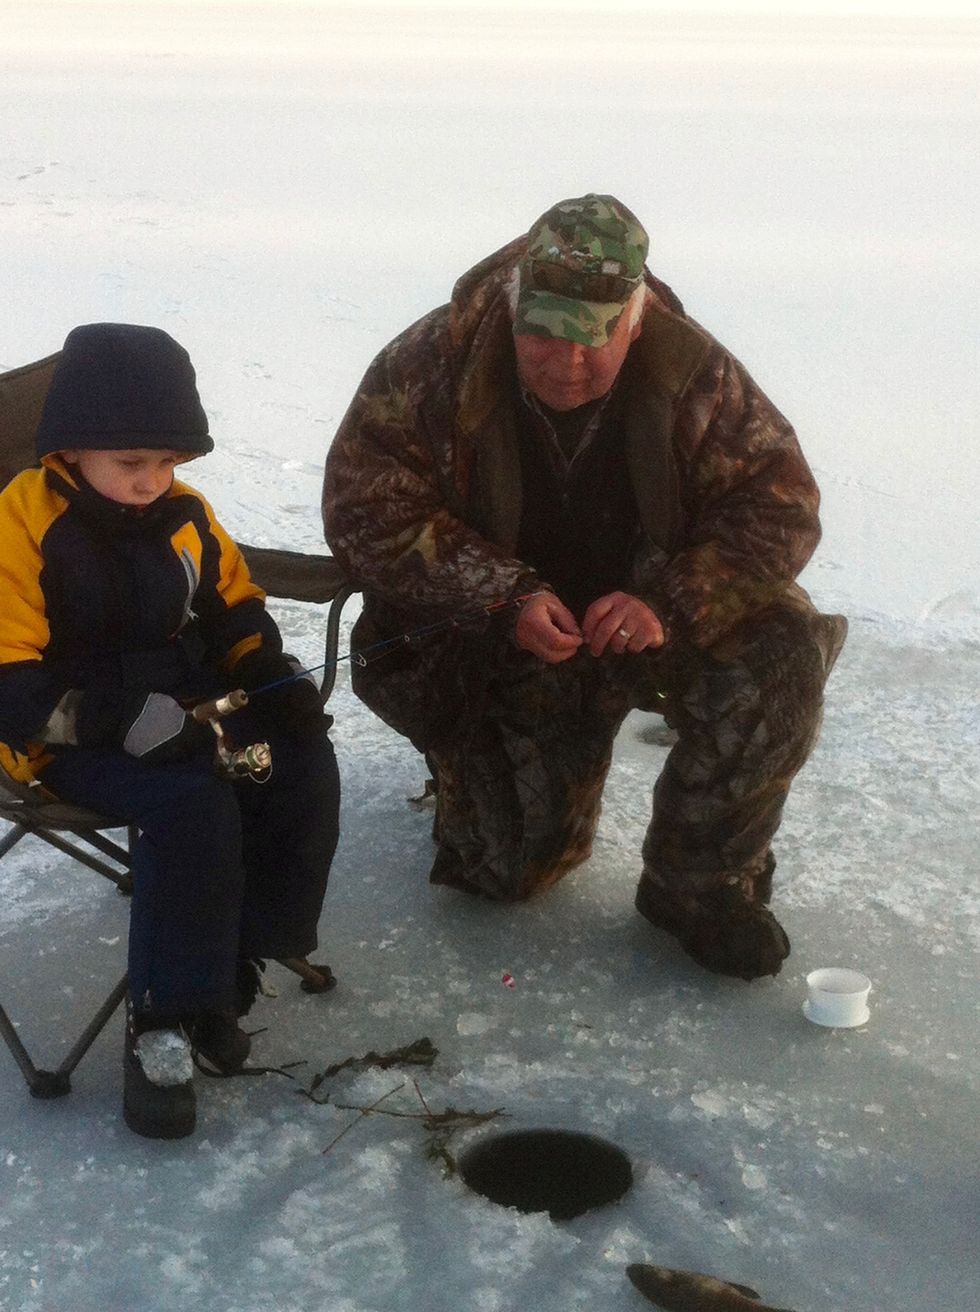 Local anglers encouraged to  take up ice fishing this winter